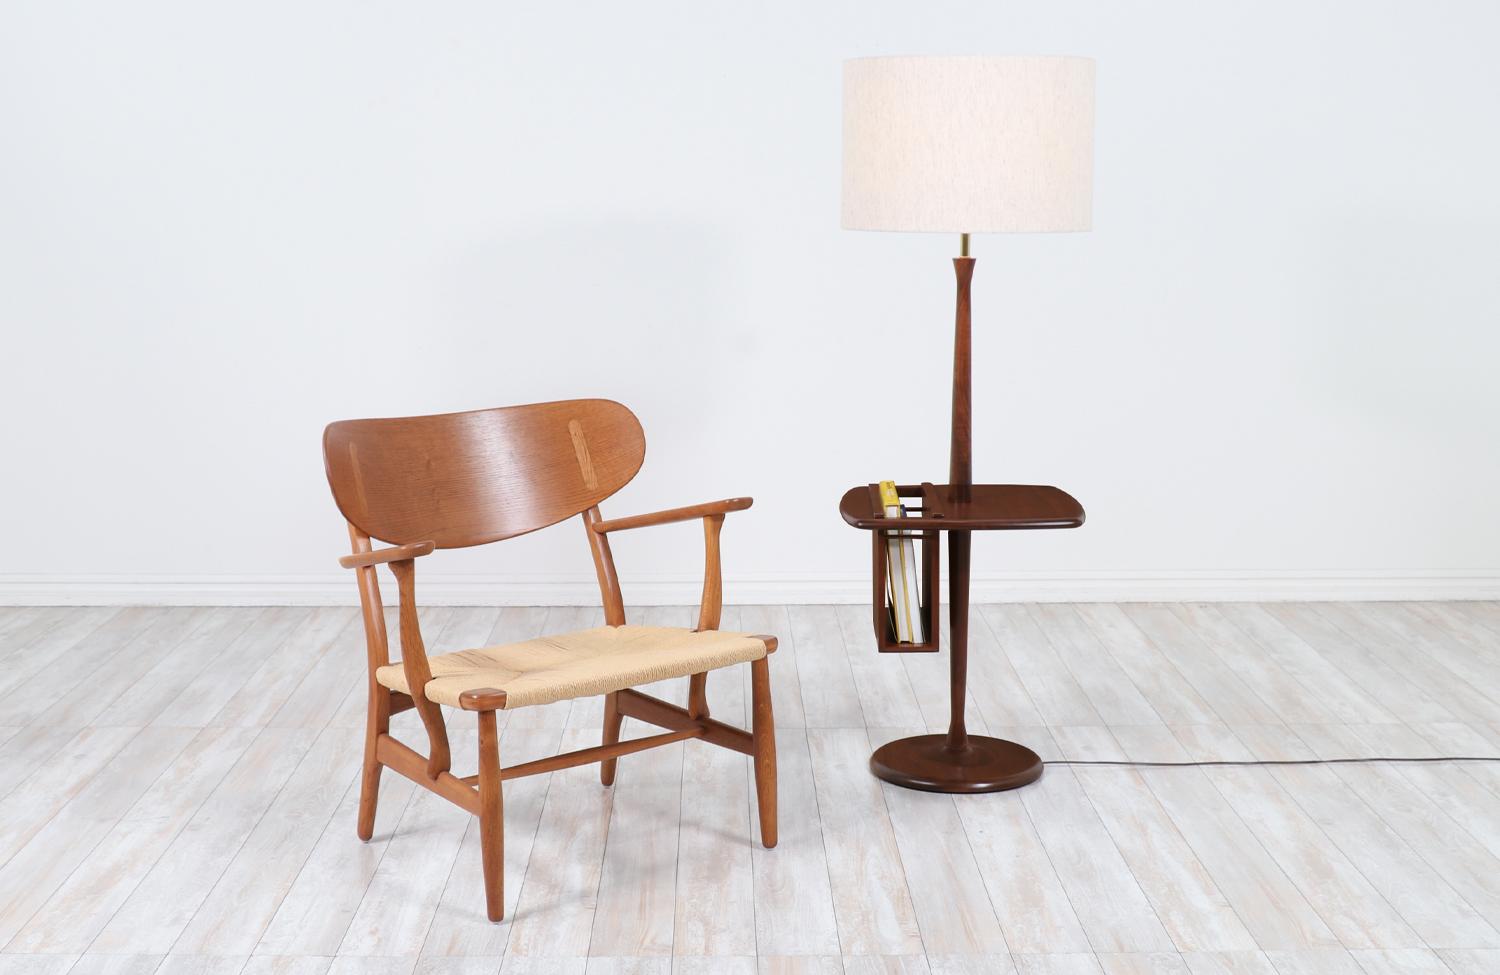 Floor Lamp manufactured by Laurel Lamp Co. in the United States circa 1960’s. This beautiful Mid-Century Modern lamp features a tall walnut wood body that supports a table with a removable magazine rack. The lamp is professionally refinished and